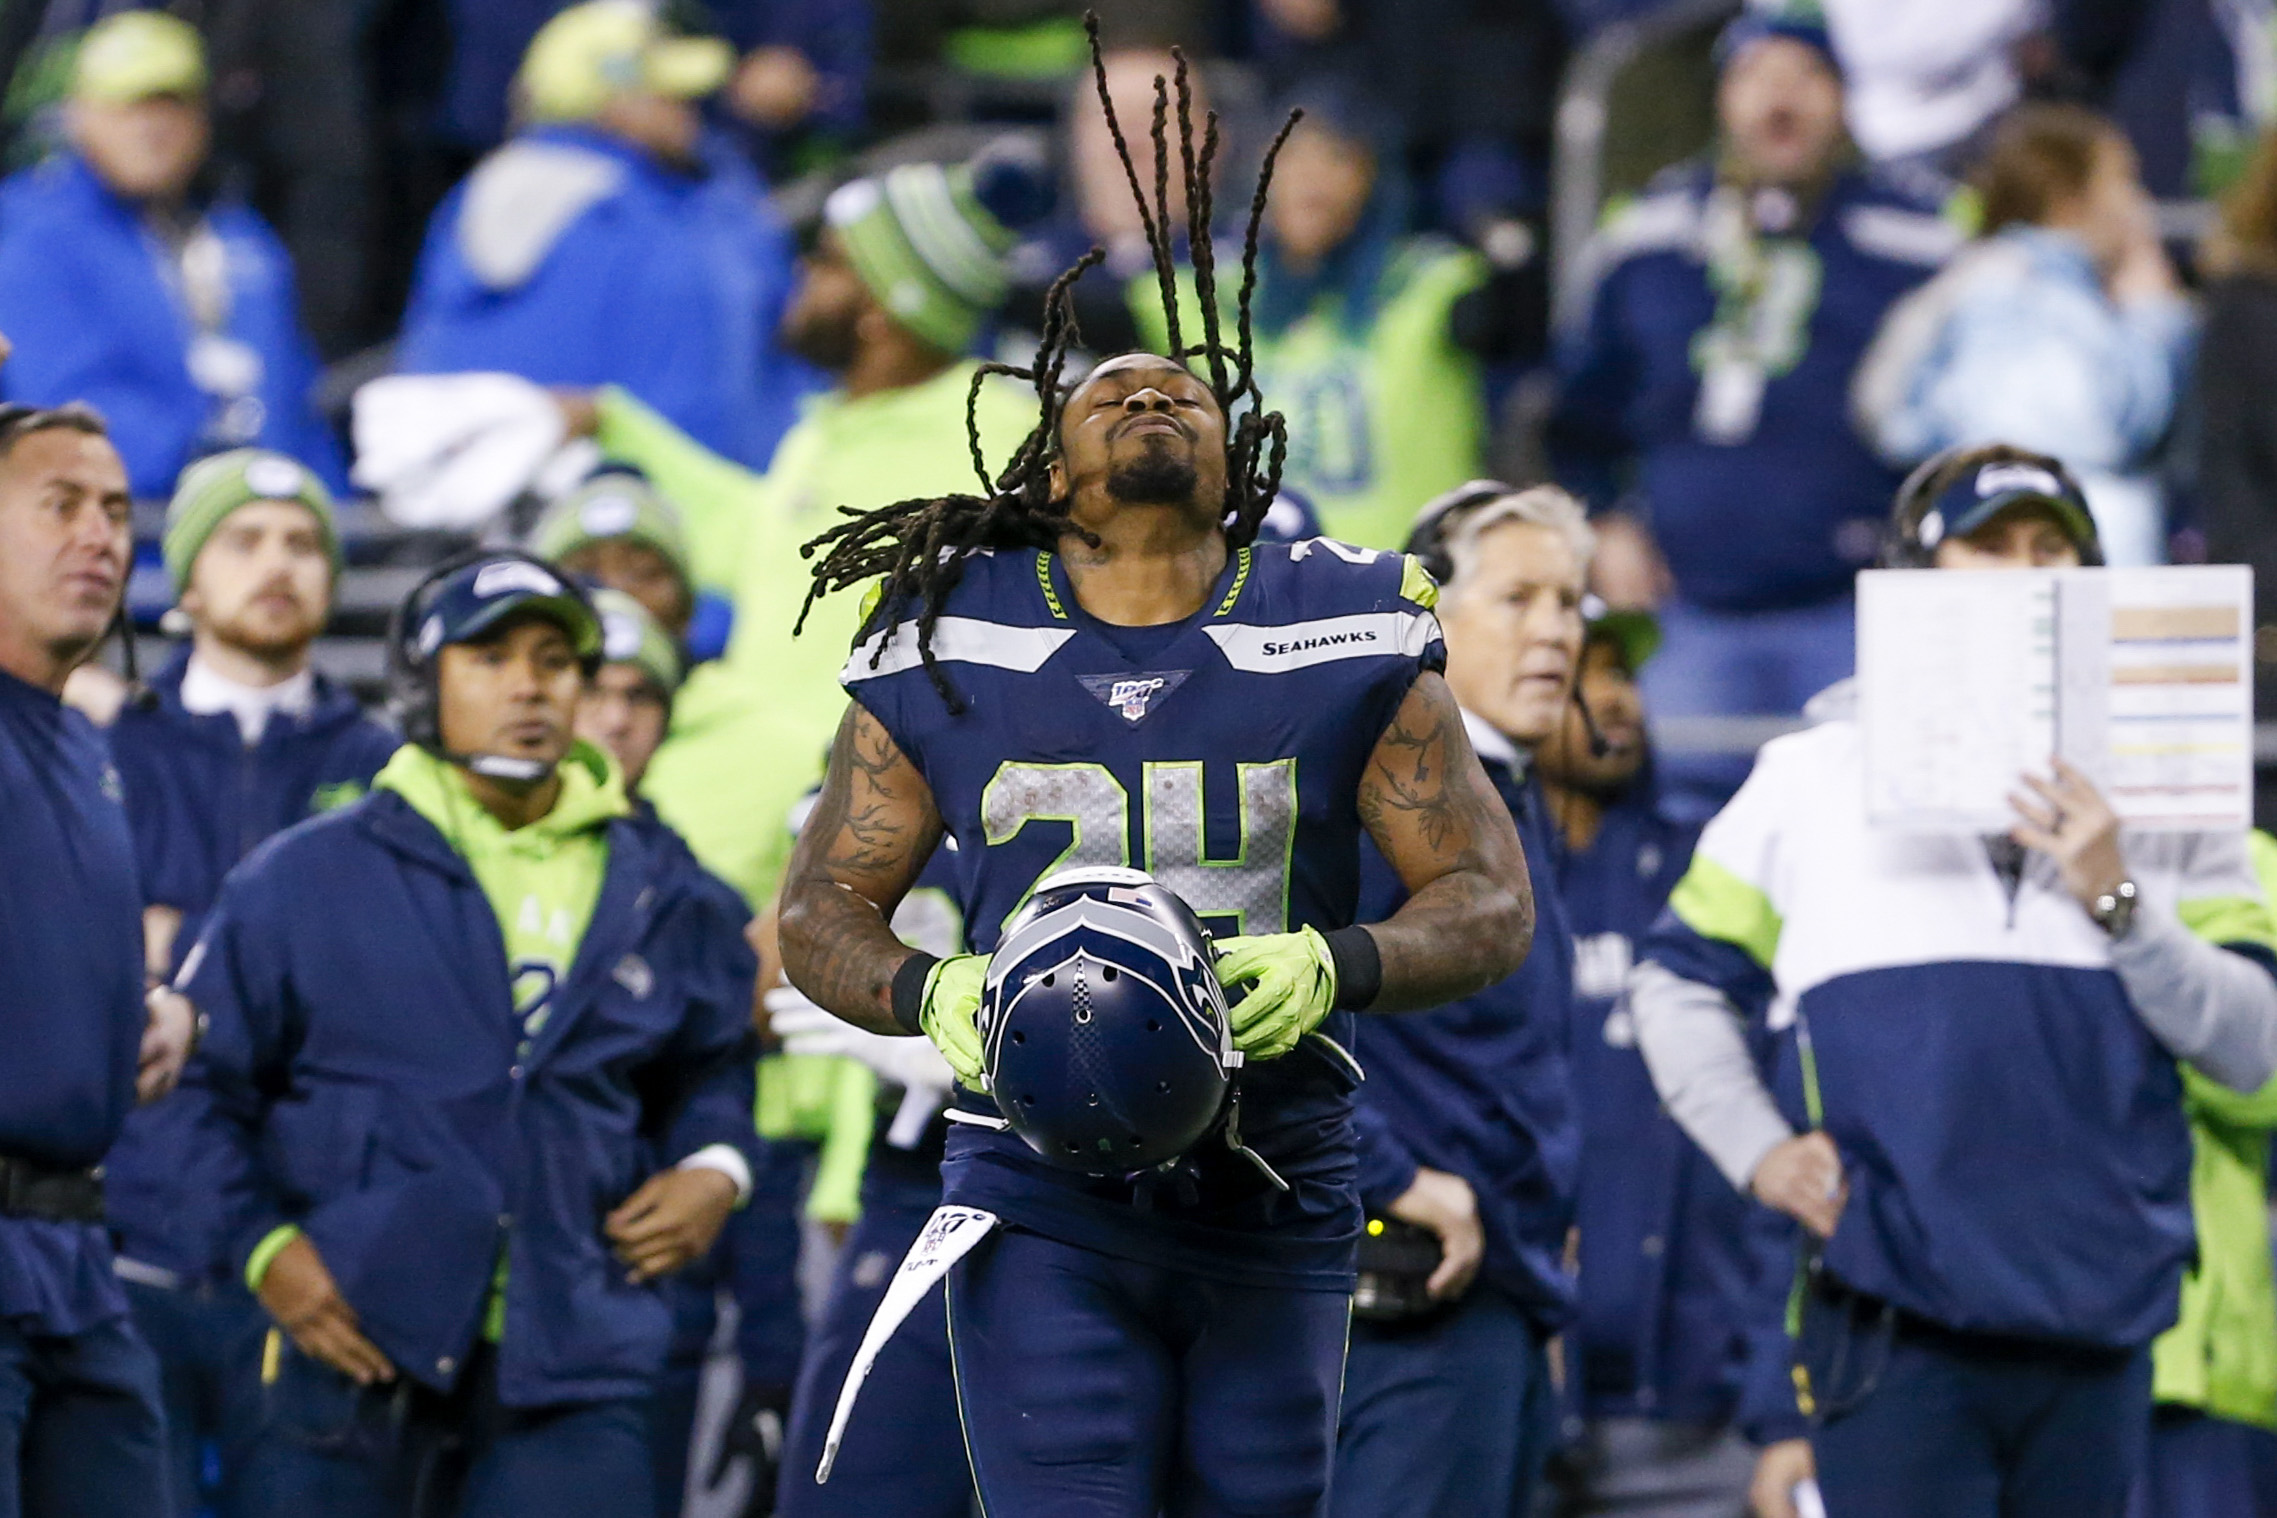 Marshawn Lynch leaves door open on playing for Seahawks this season